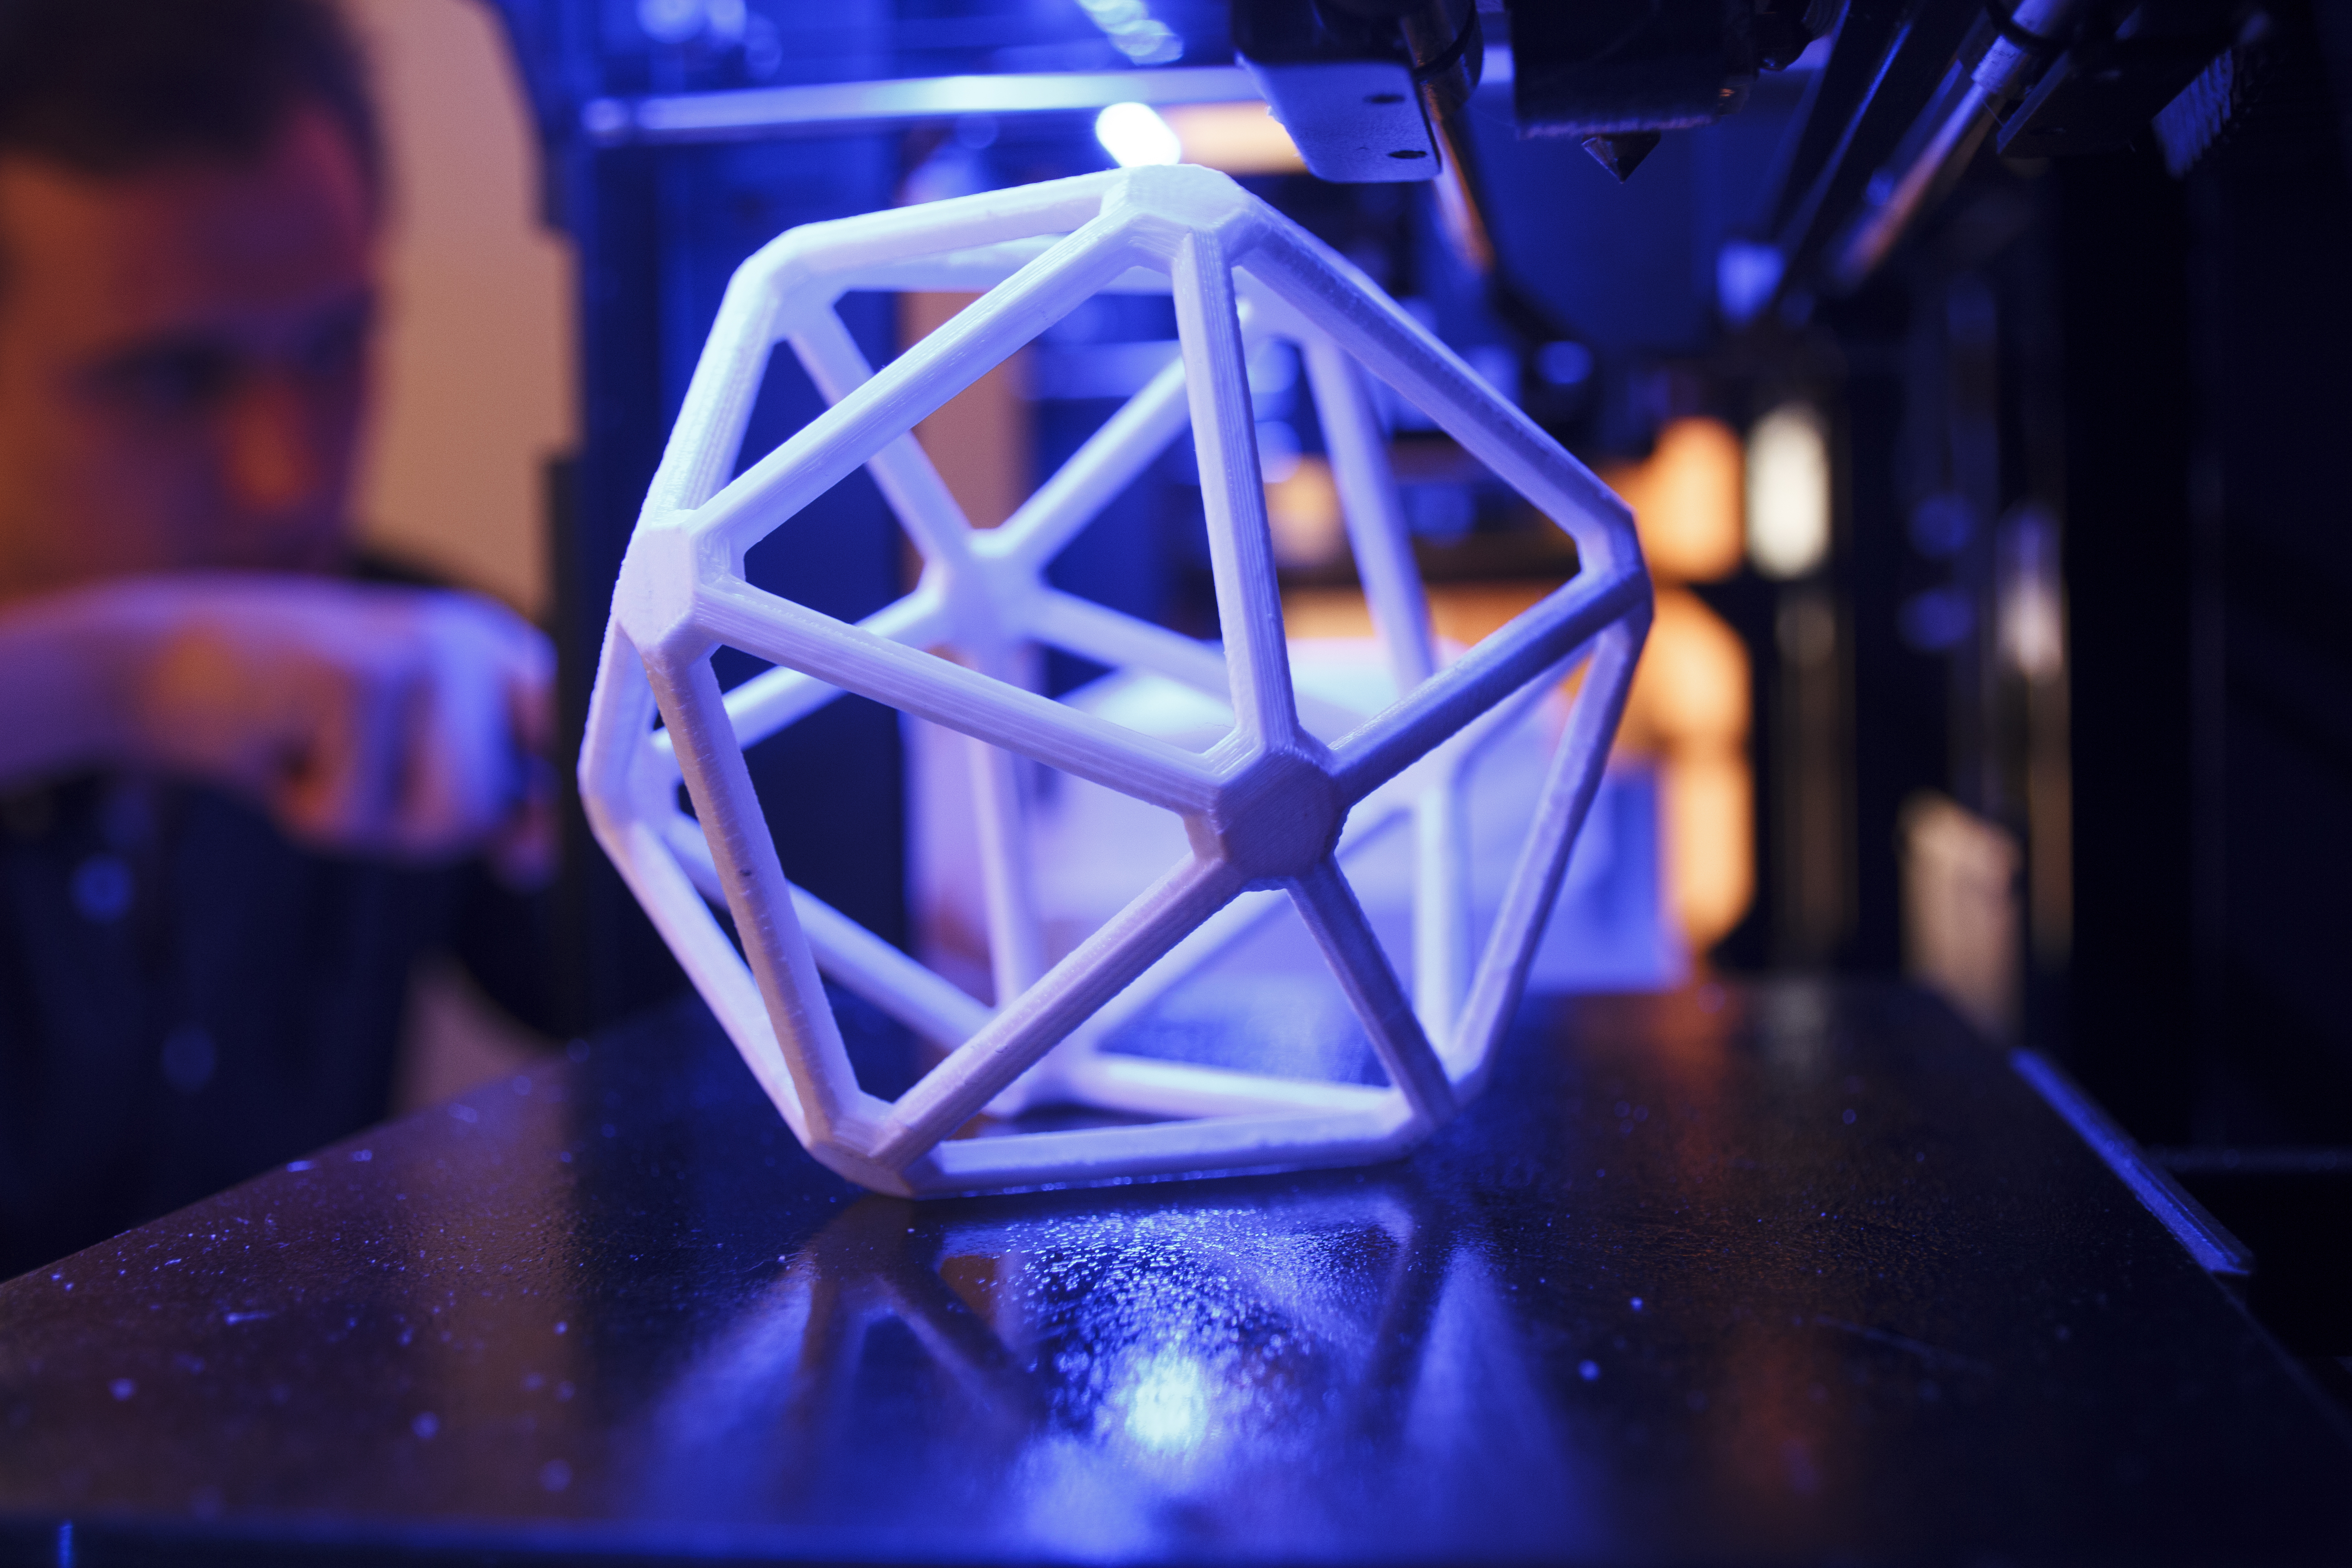 3D geometric figure on the platform of a 3D printer with a man in the background